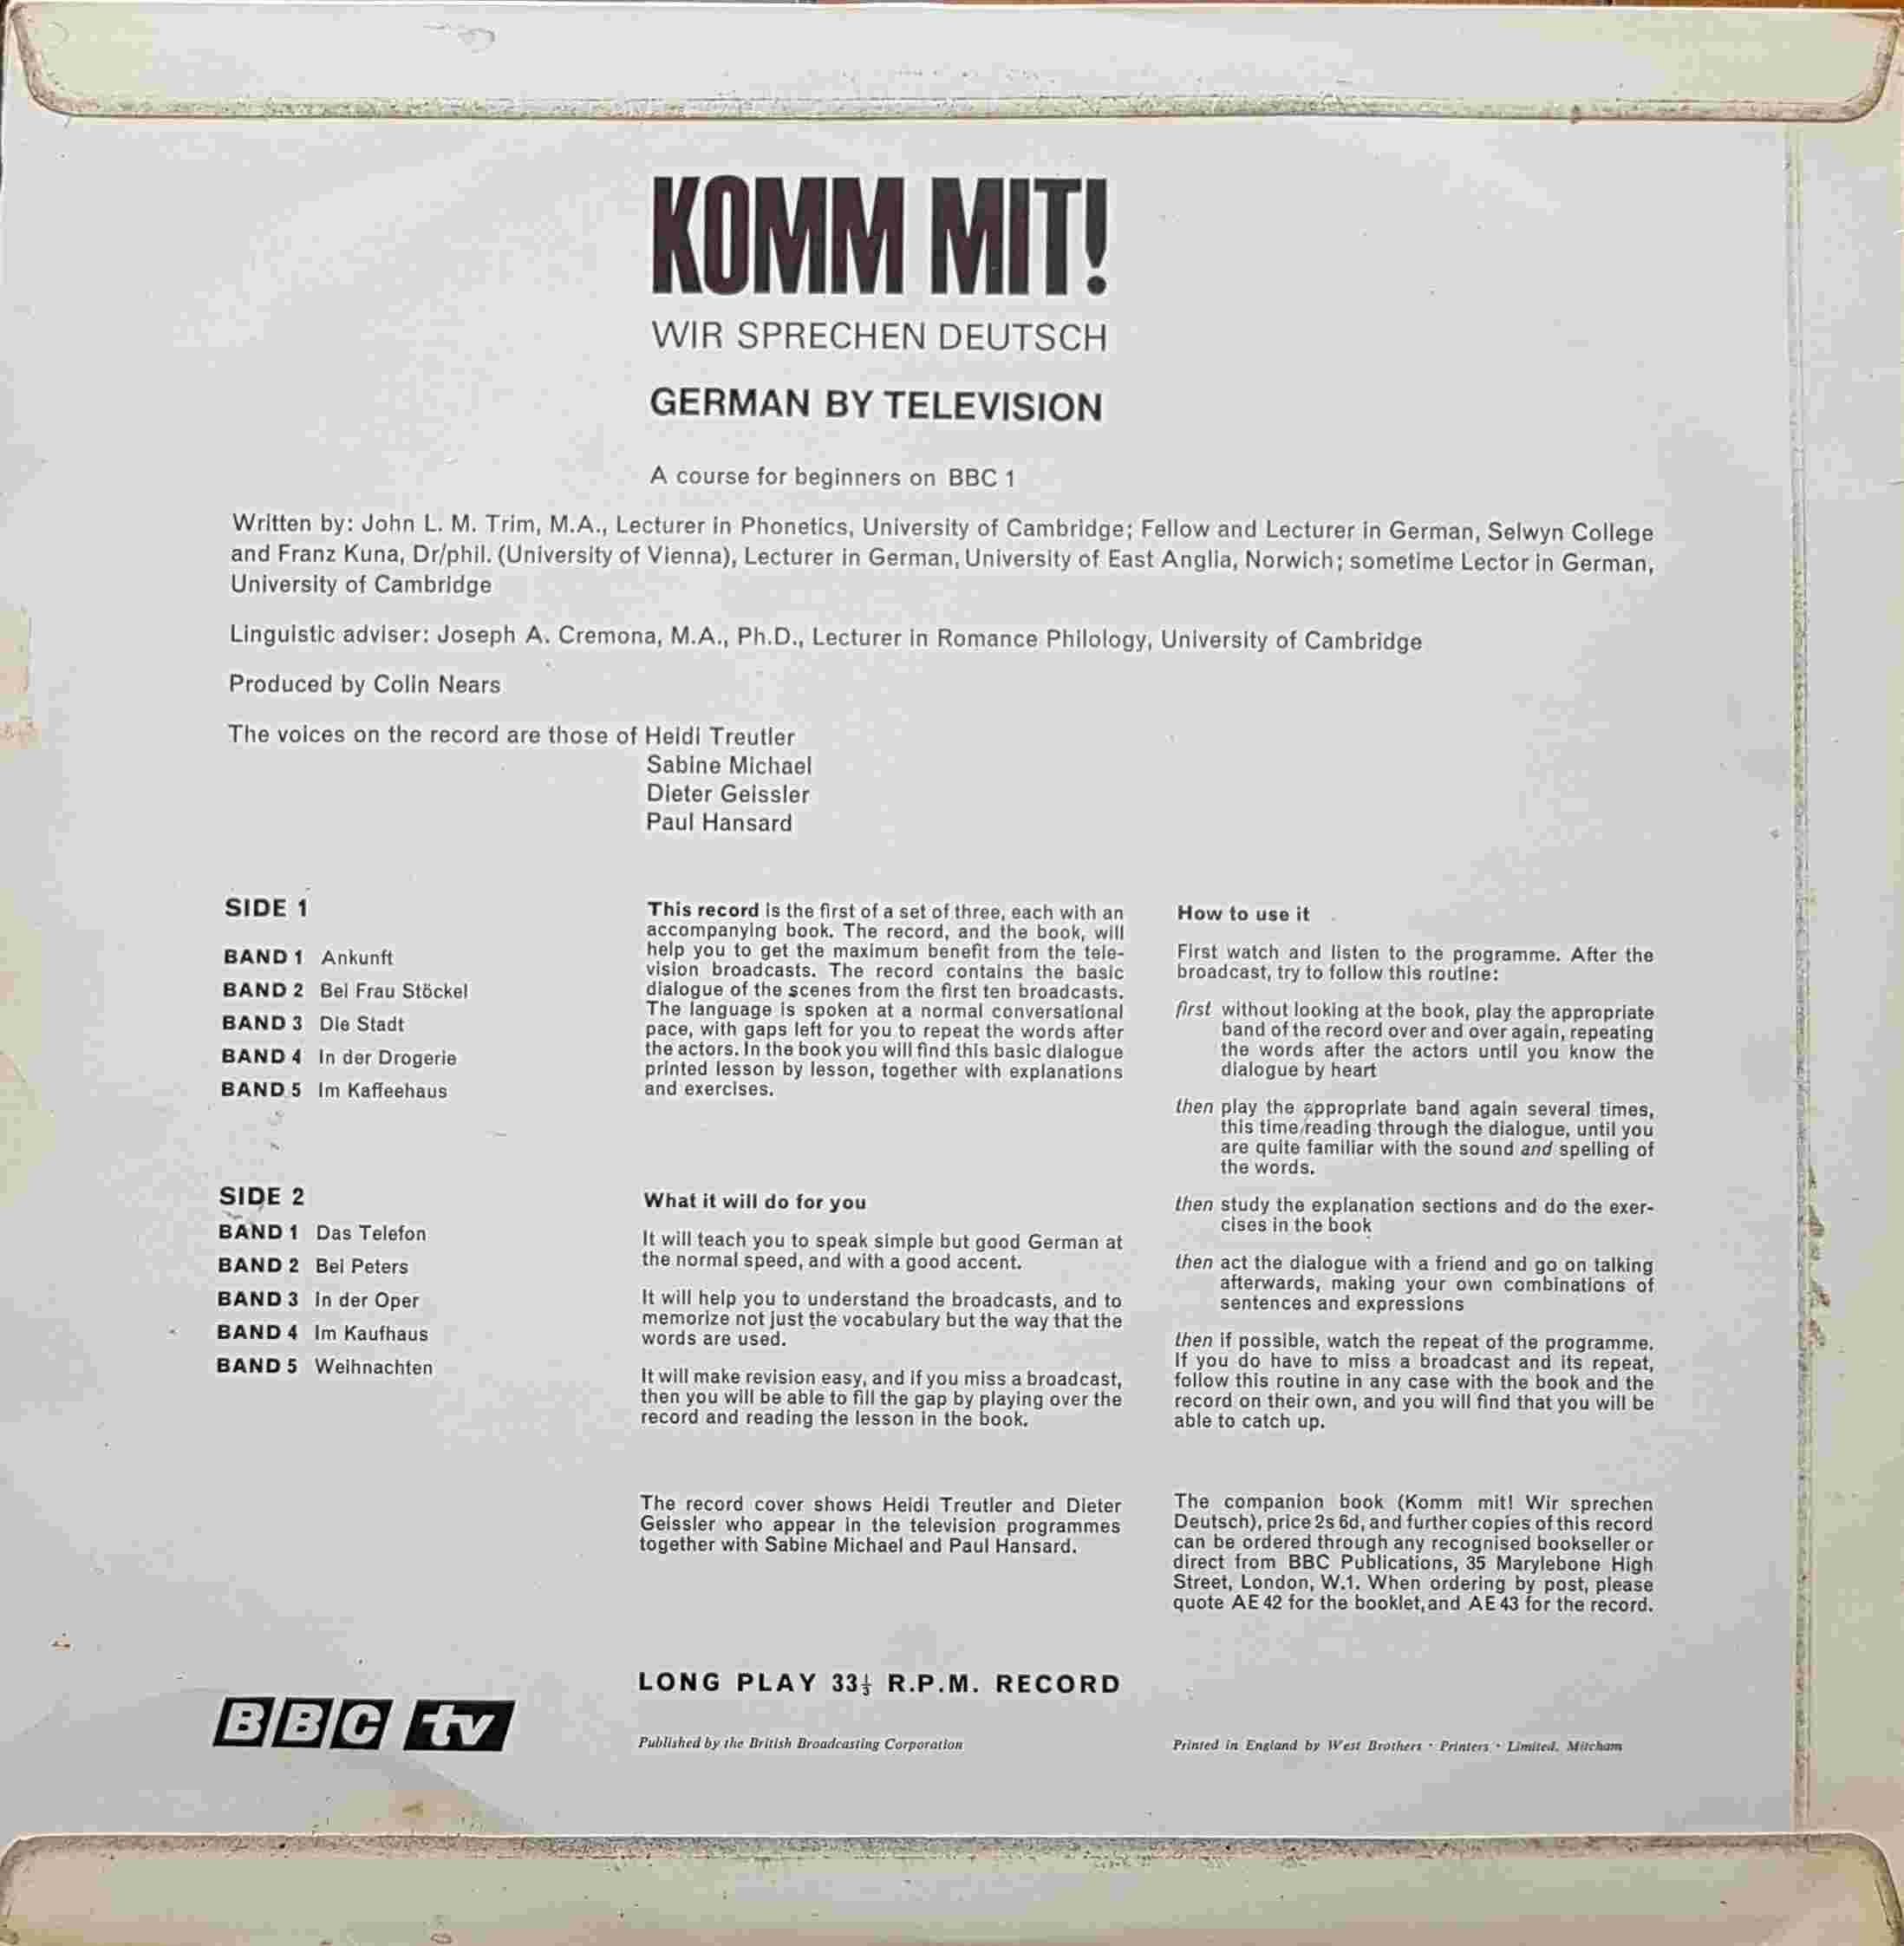 Picture of OP 9/10 Komm mit! Wir sprechen Deutsch - A BBC course for beginners lessons 1 - 10 by artist John L. M. Trim / Frank Kuna from the BBC records and Tapes library